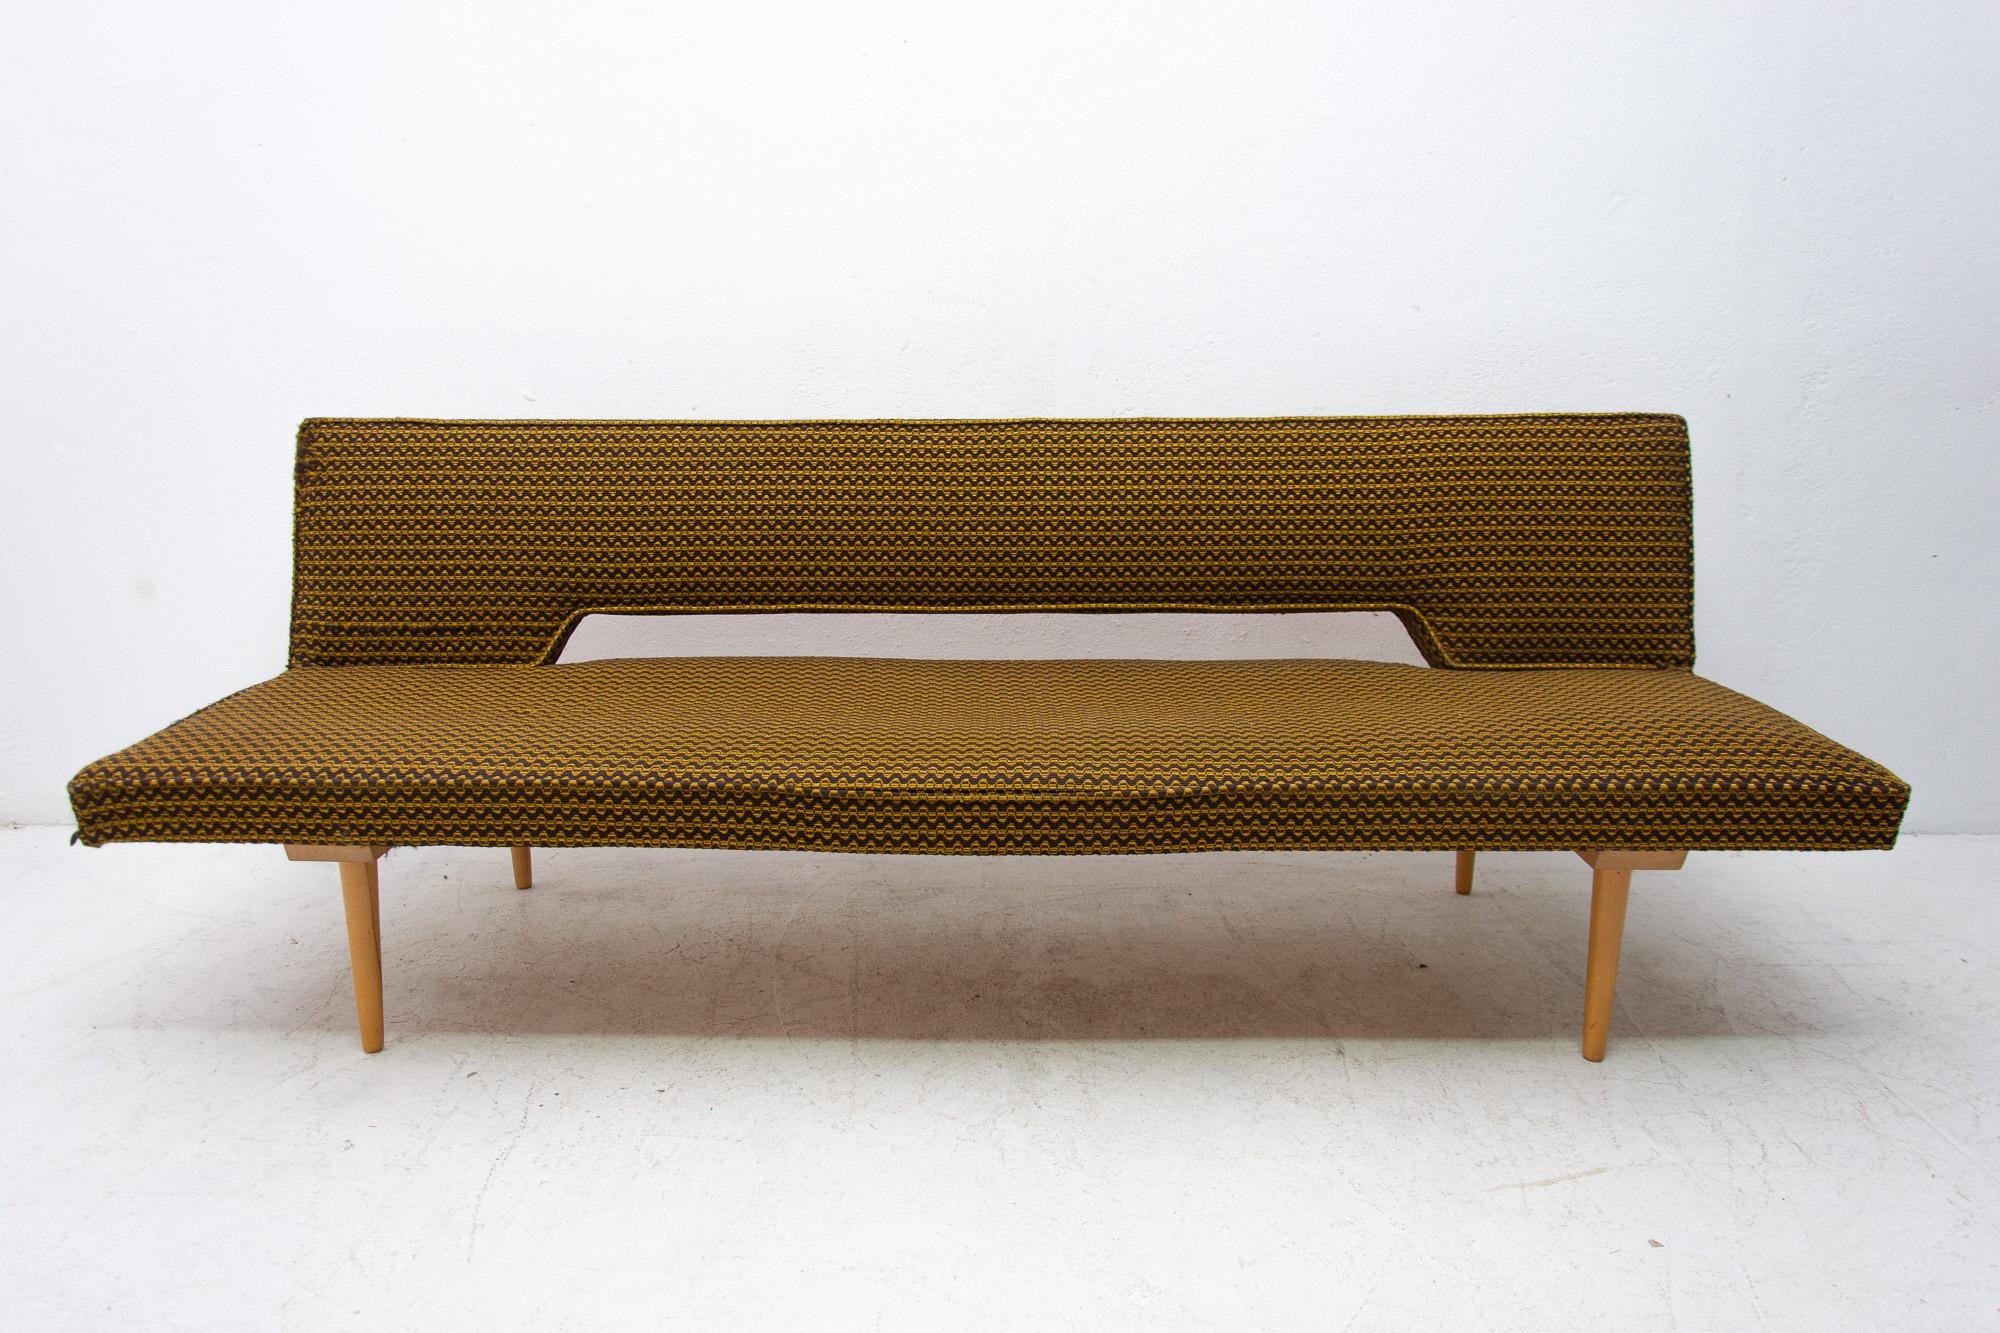 Midcentury adjustable sofa-bench designed by the Czech famous designer Miroslav Navrátil in the 1960s. Made in Czechoslovakia. It features were attractive and simple design. Material: fabric, beechwood. It´s a typical example of Czechoslovak design